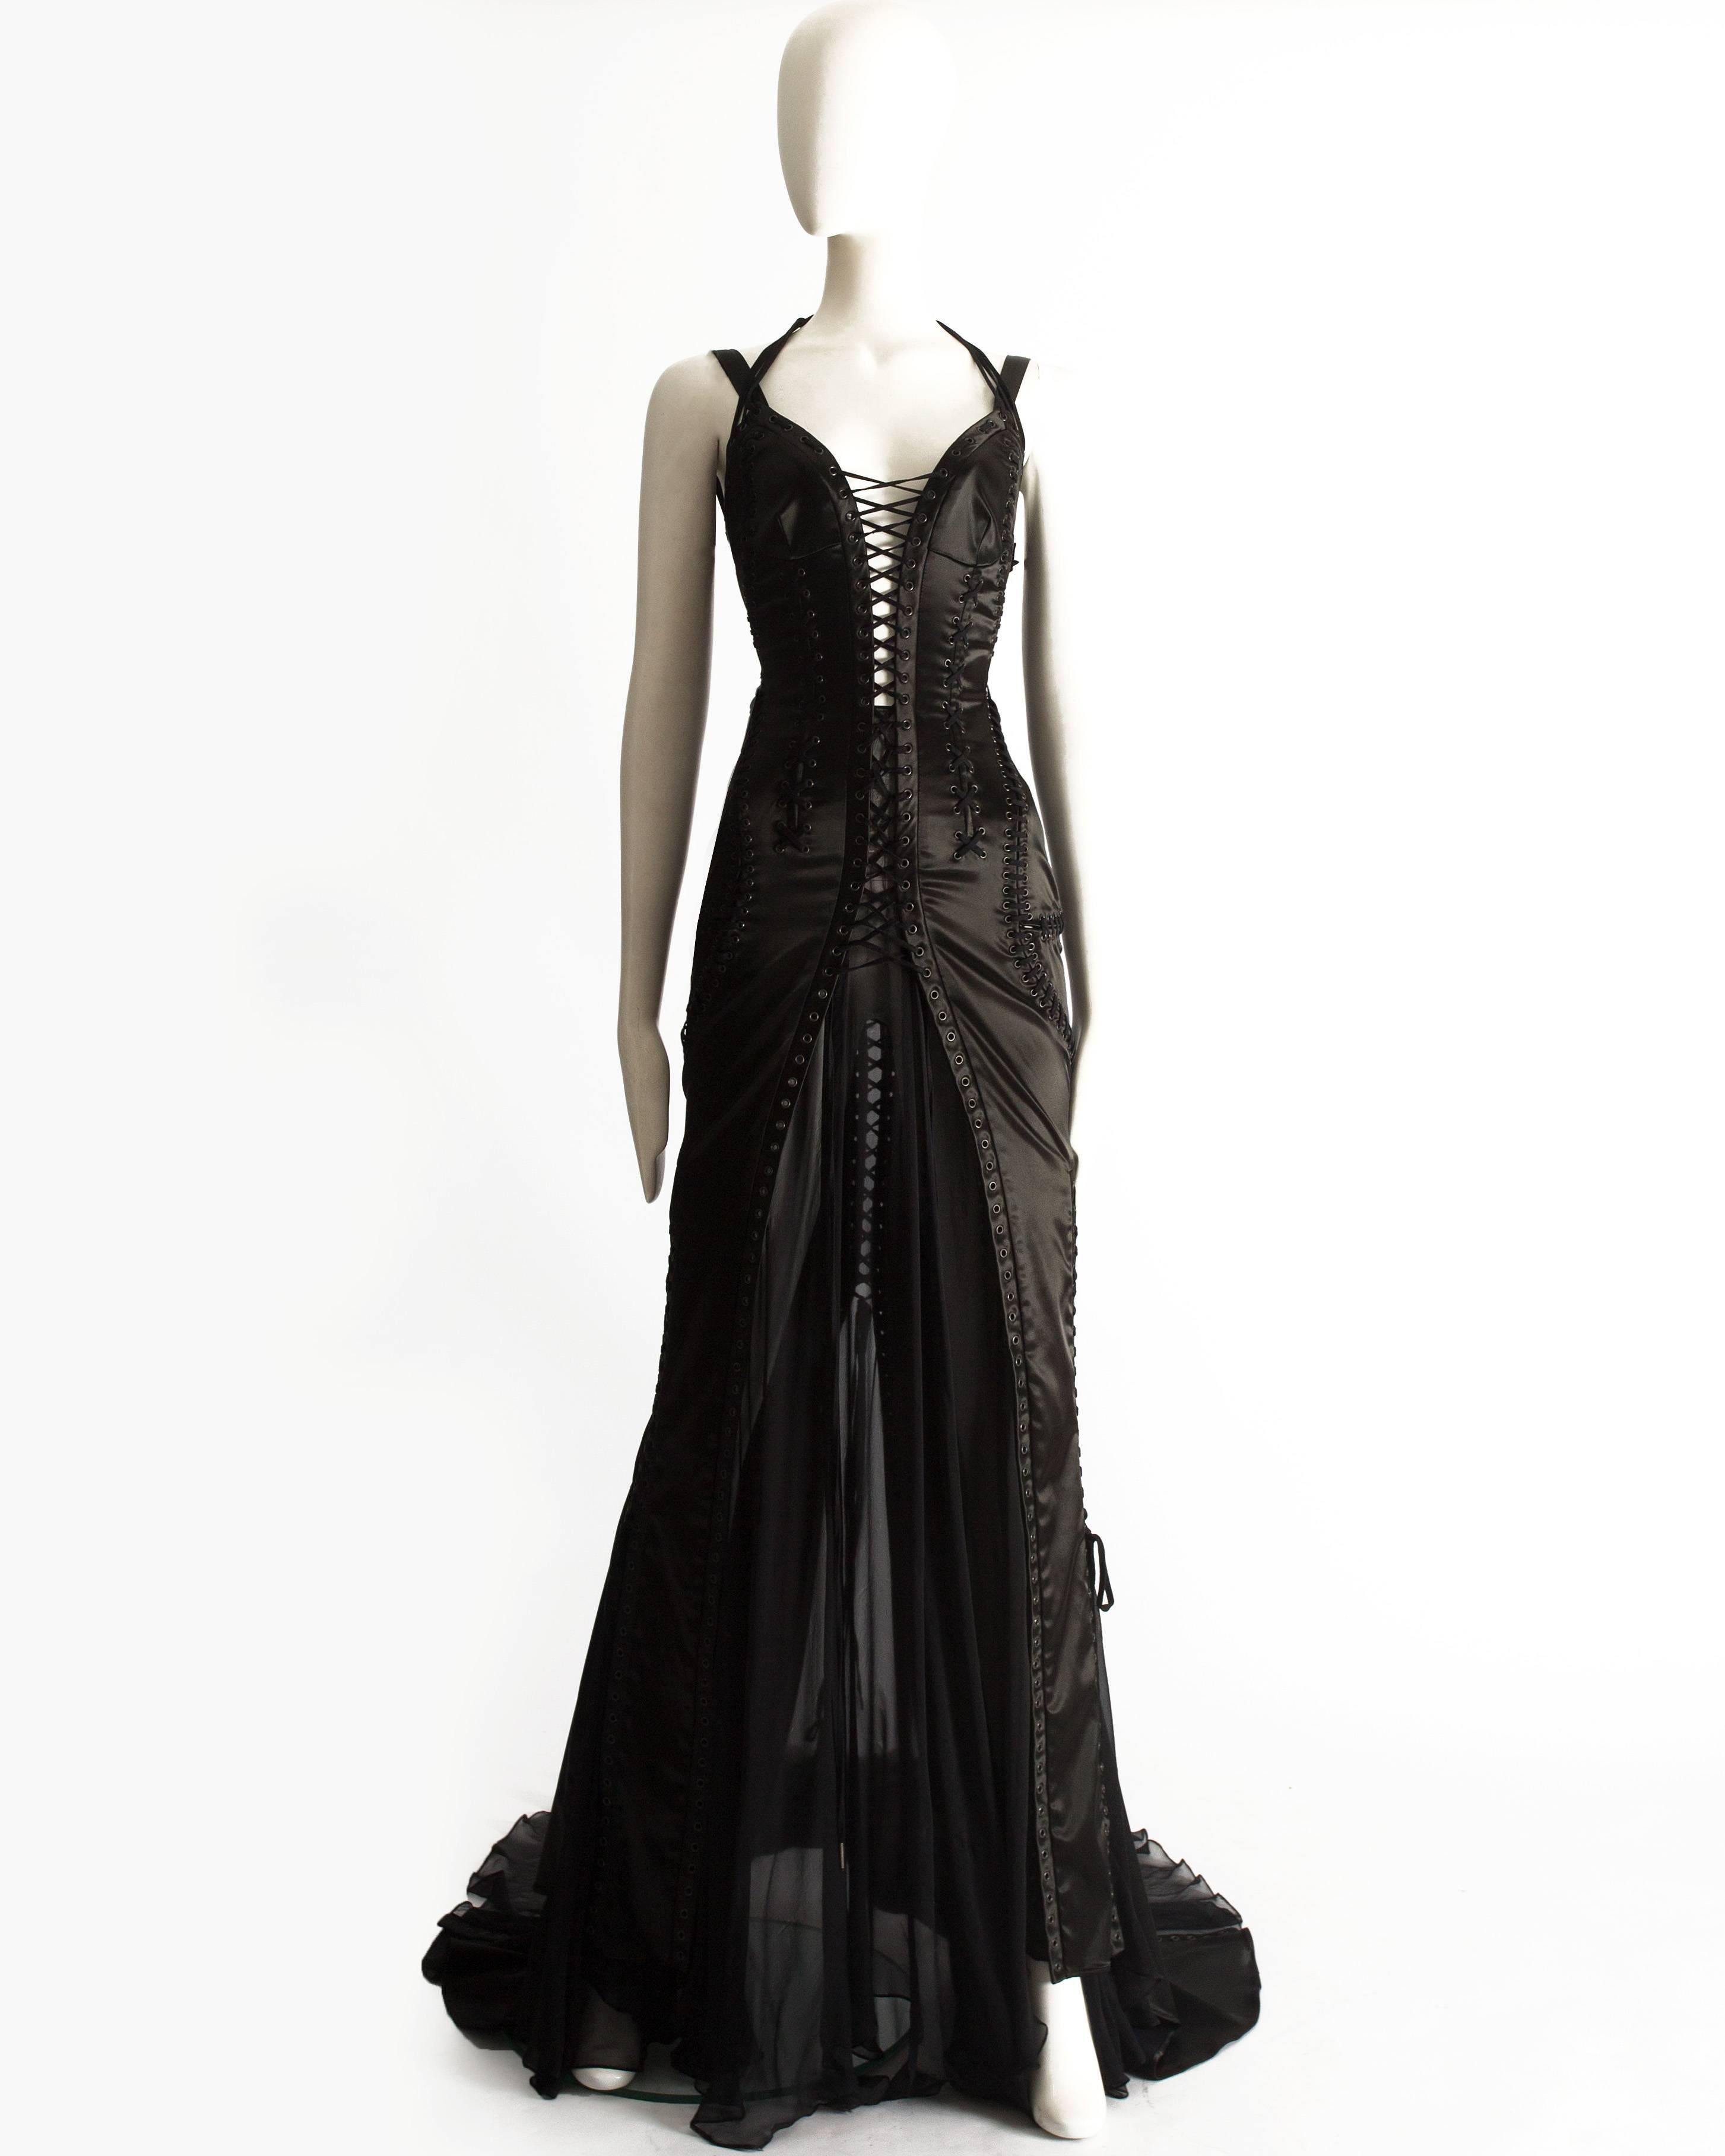 Black Dolce & Gabbana black satin full length lace up evening gown, AW 2003